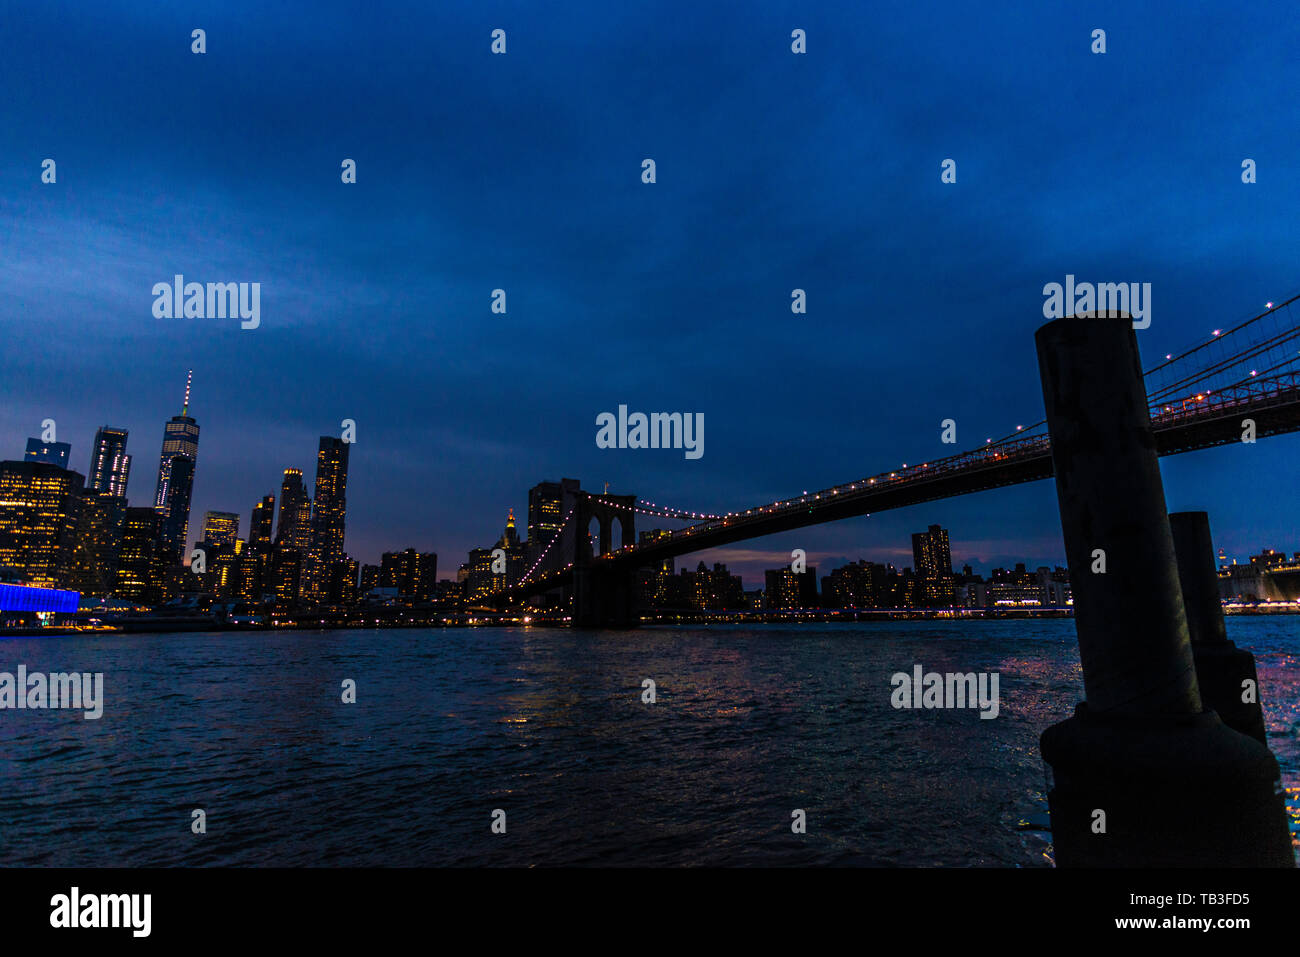 Skyline of the Brooklyn Bridge and modern skyscrapers of New York Financial District and the Lower Manhattan at night with marine monopile in New York Stock Photo